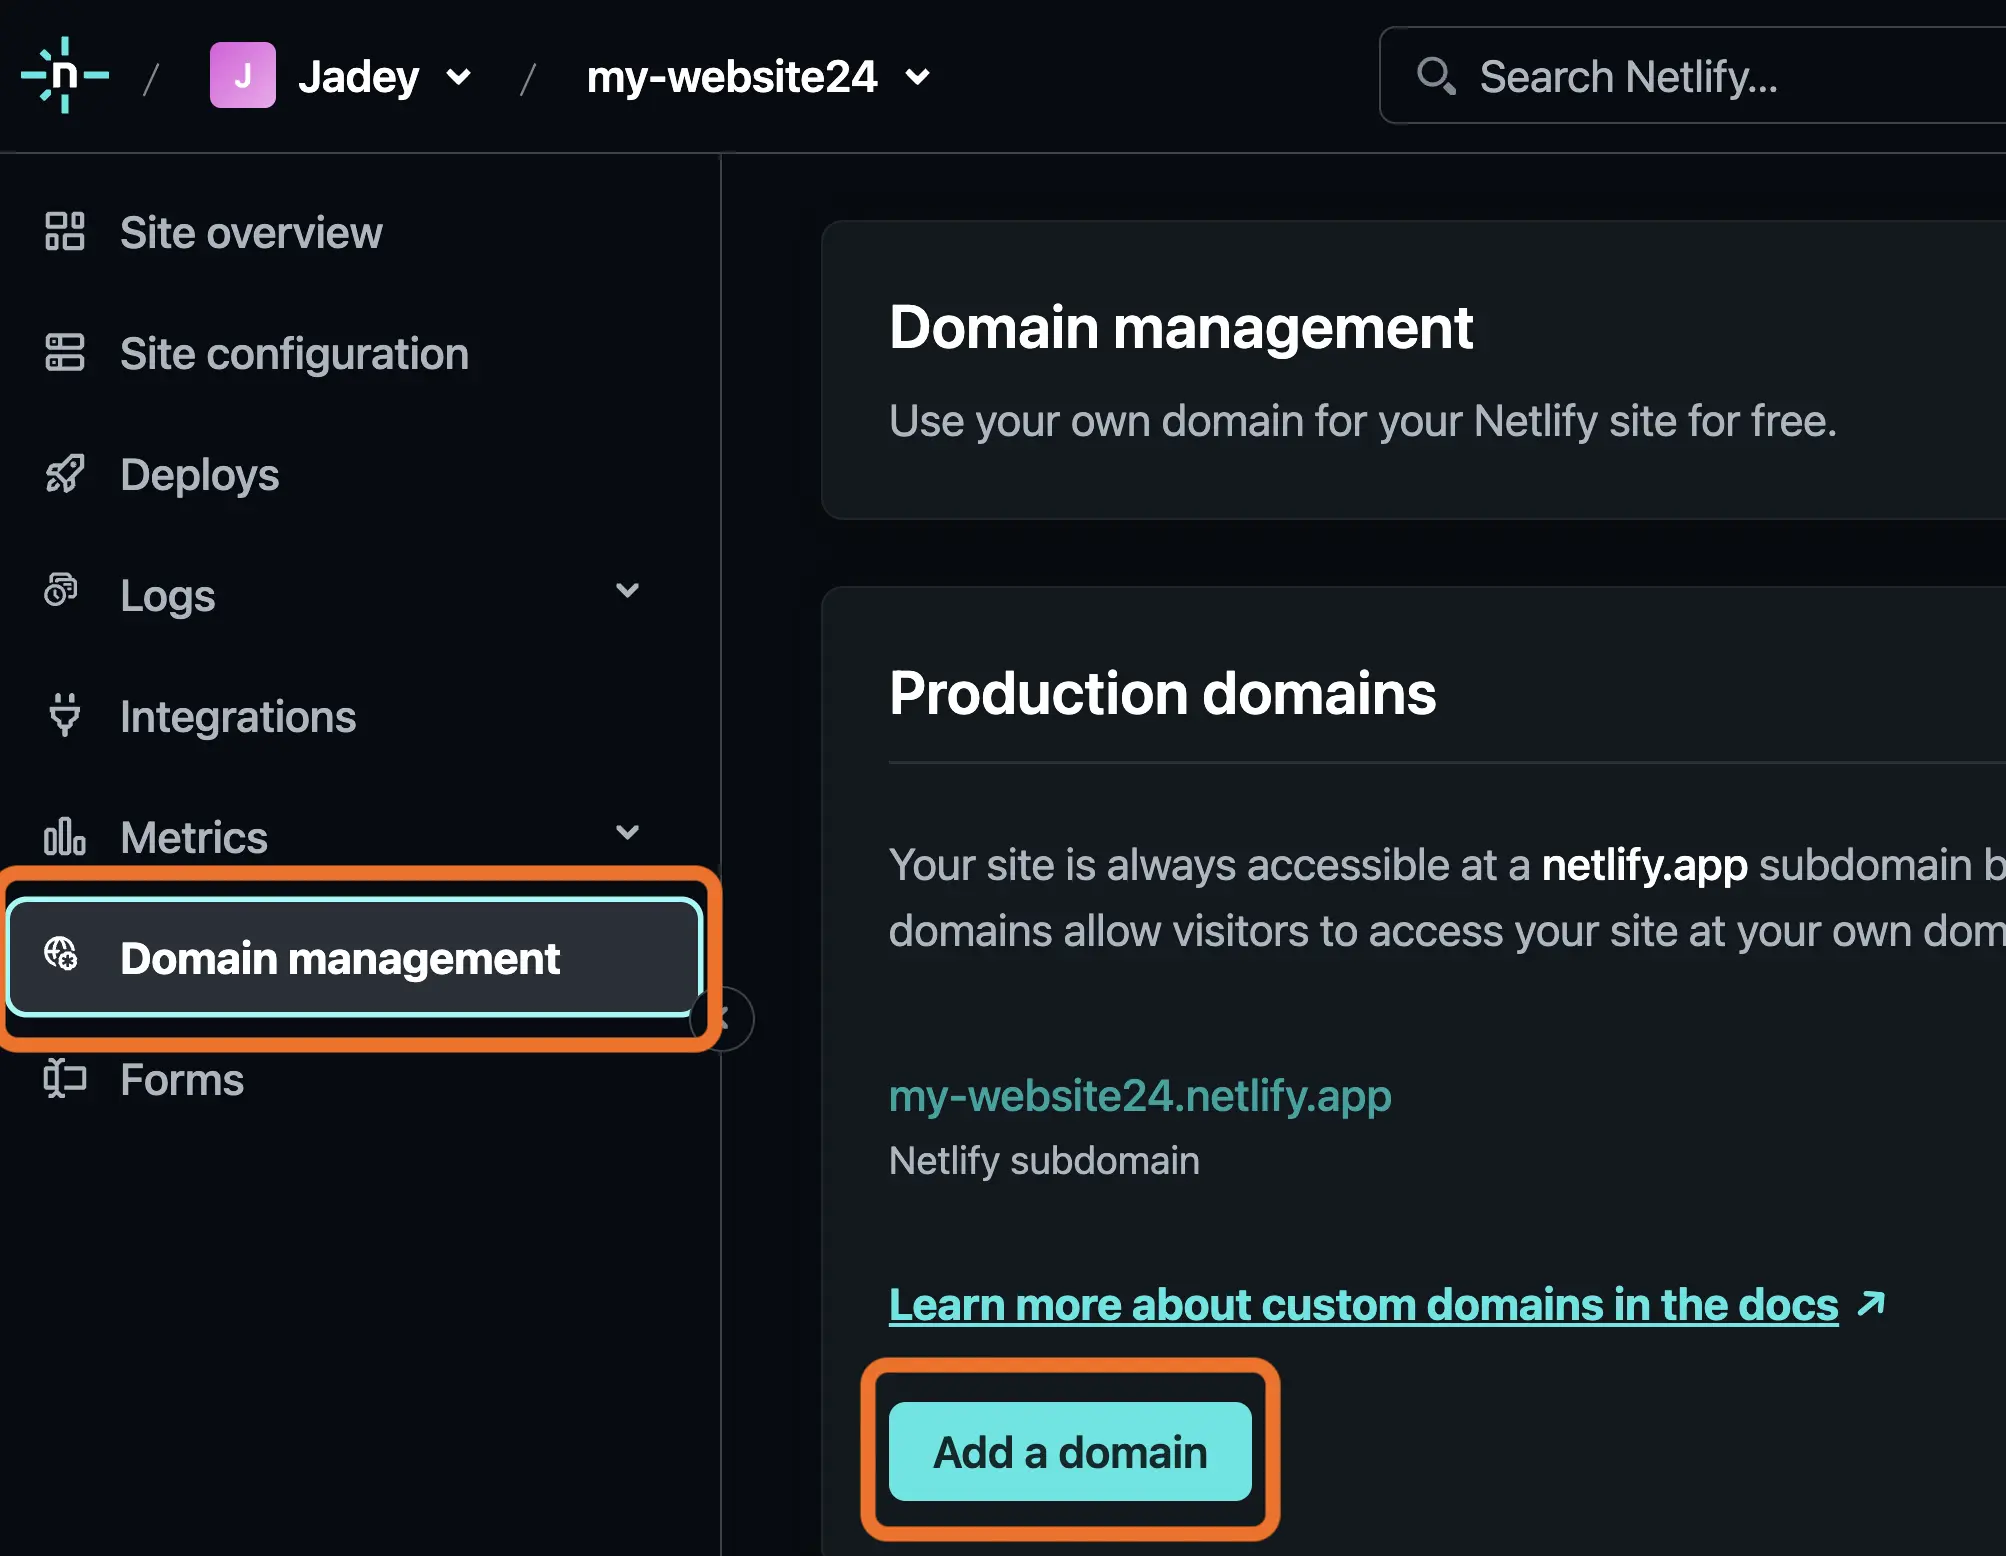 Domain management part of Netlify site with option to add a domain.